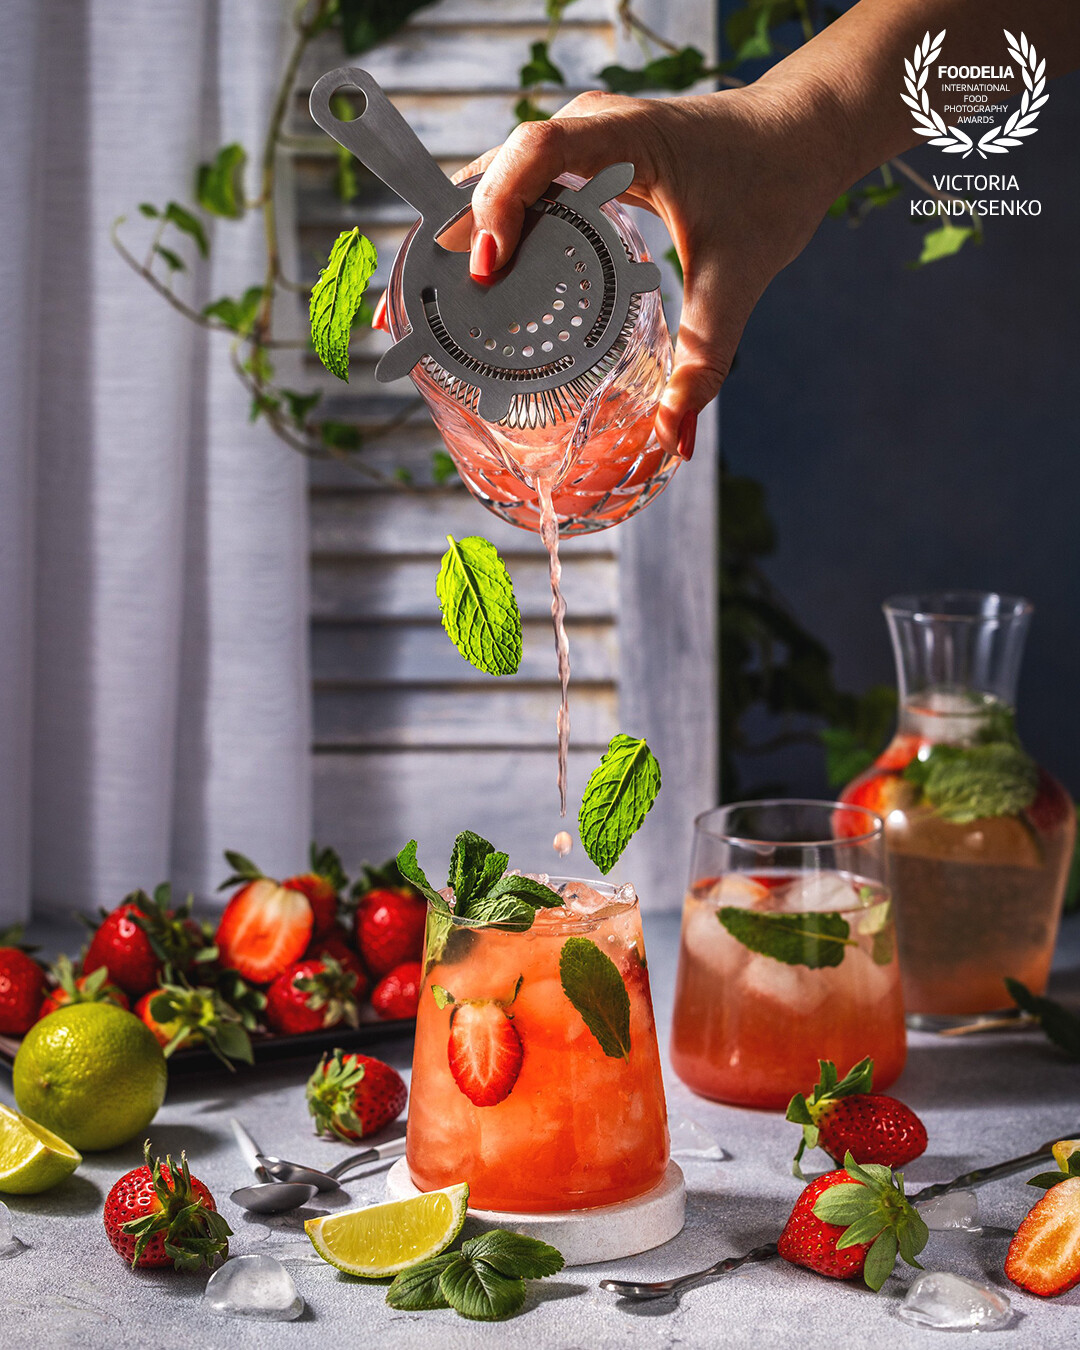 Strawberry fizz with mint and lime. Promotional photo shoot of the local Ukrainian family cafe.